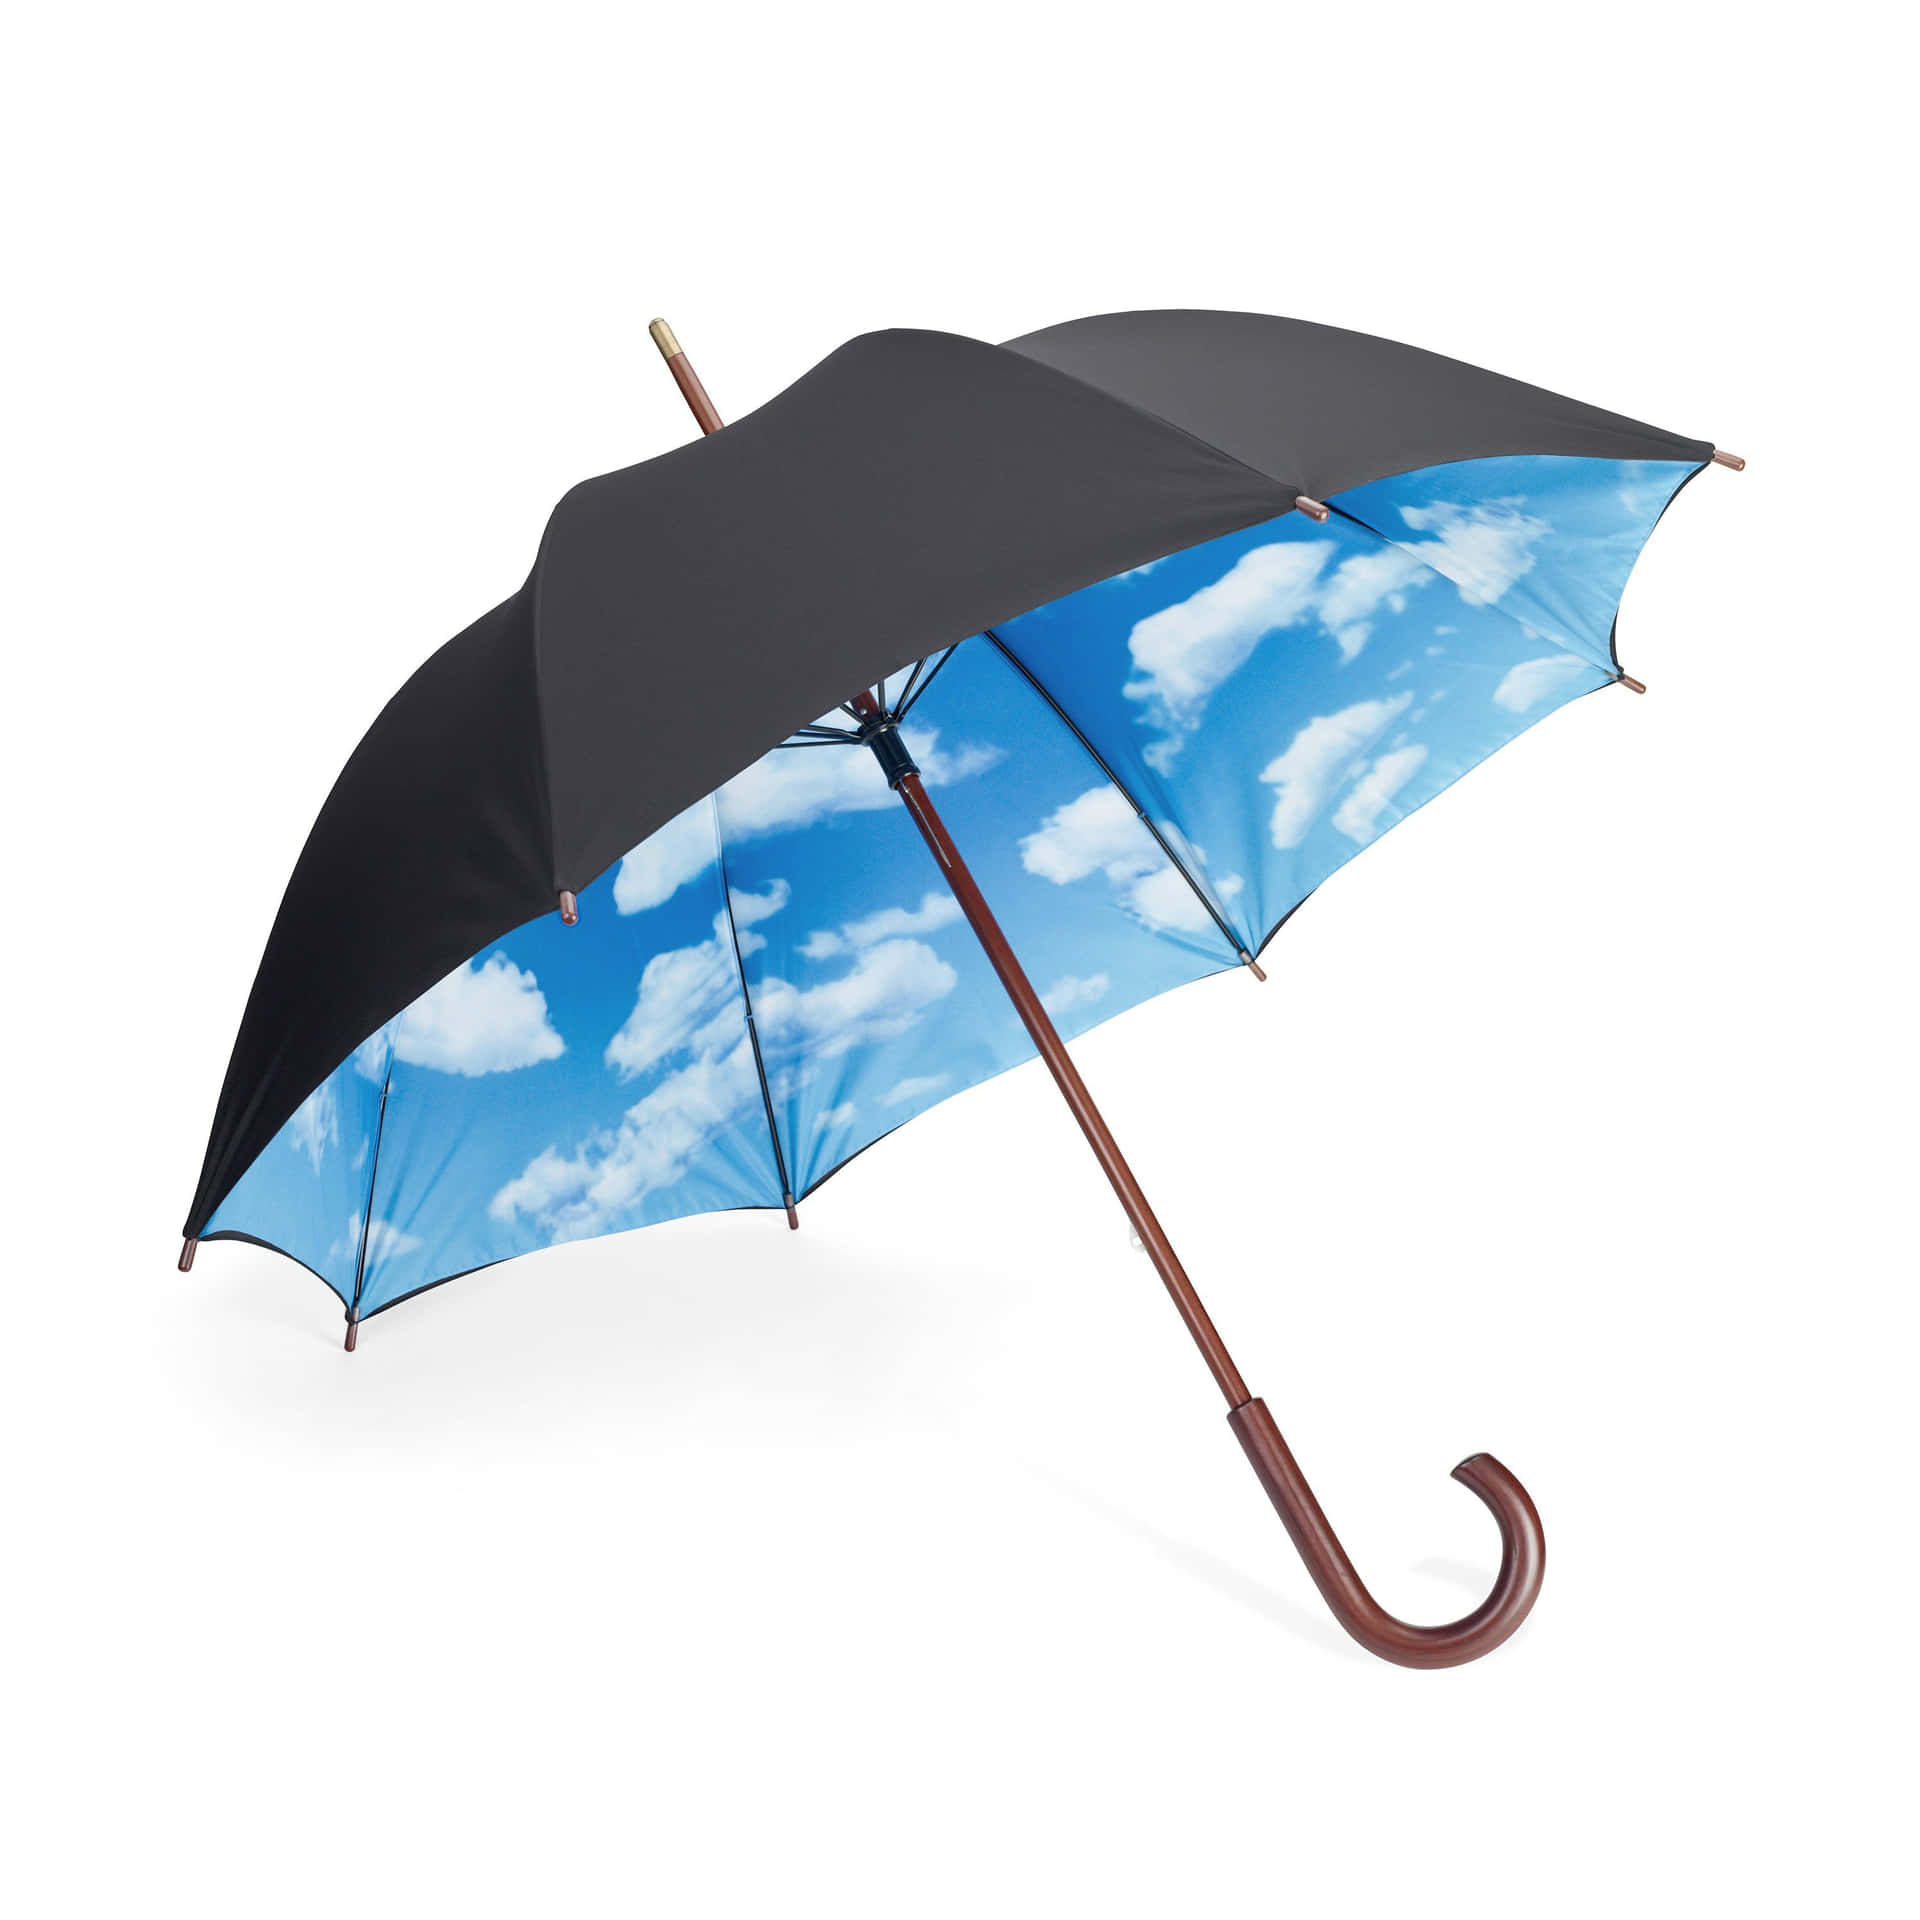 Get ready for rain and shine with a reliable umbrella